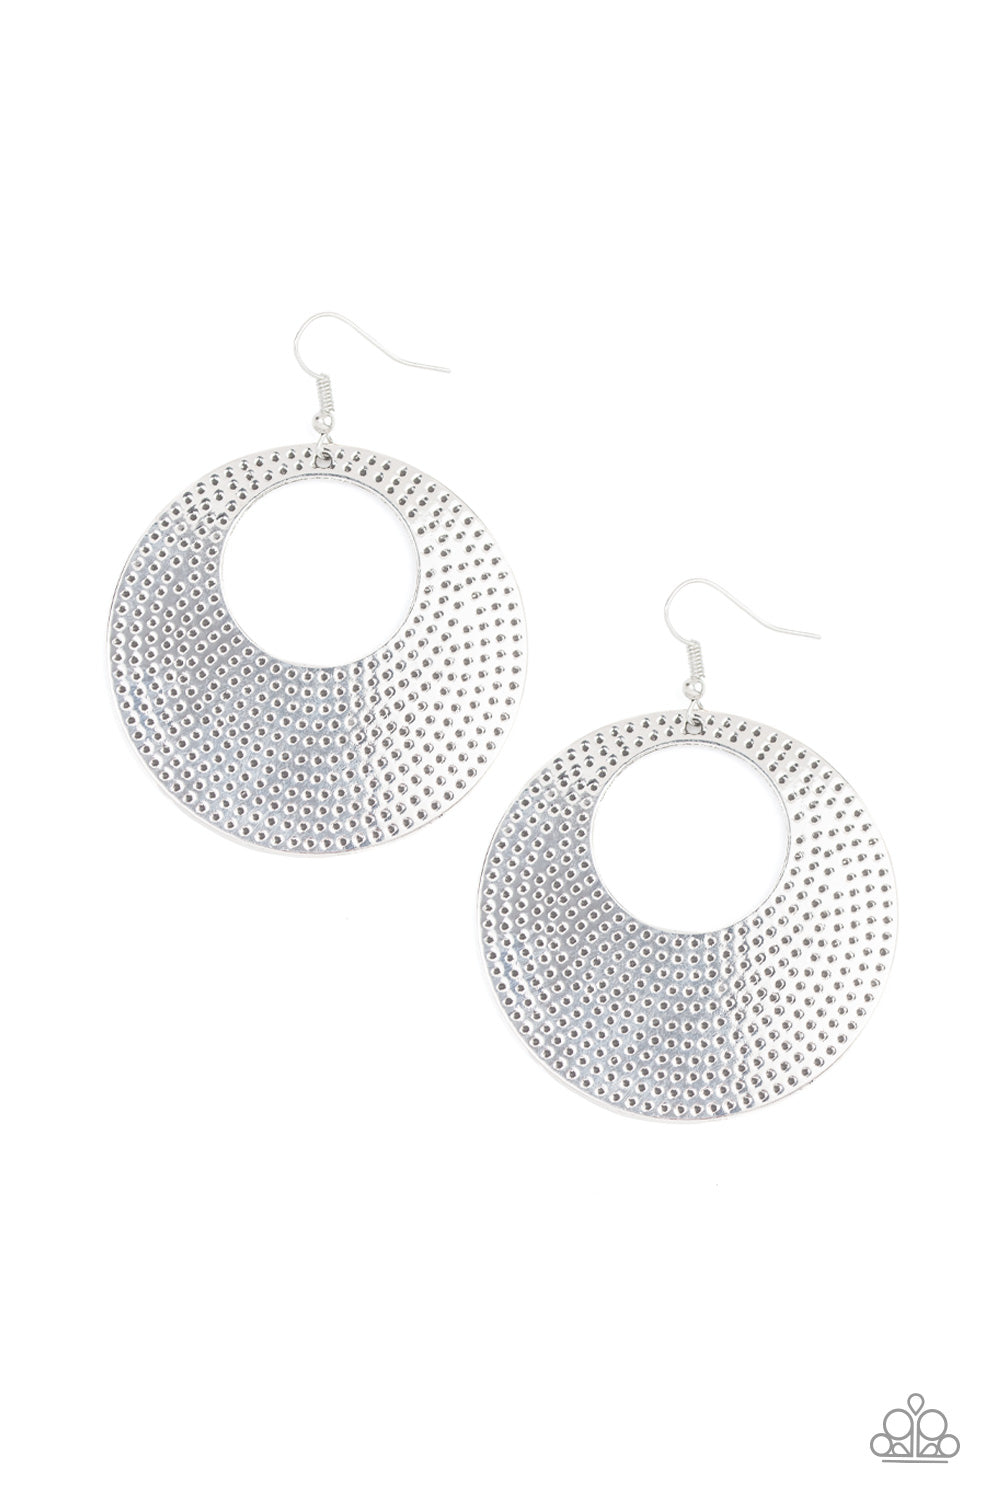 Dotted Delicacy Silver Paparazzi Earring Cashmere Pink Jewels - Cashmere Pink Jewels & Accessories, Cashmere Pink Jewels & Accessories - Paparazzi